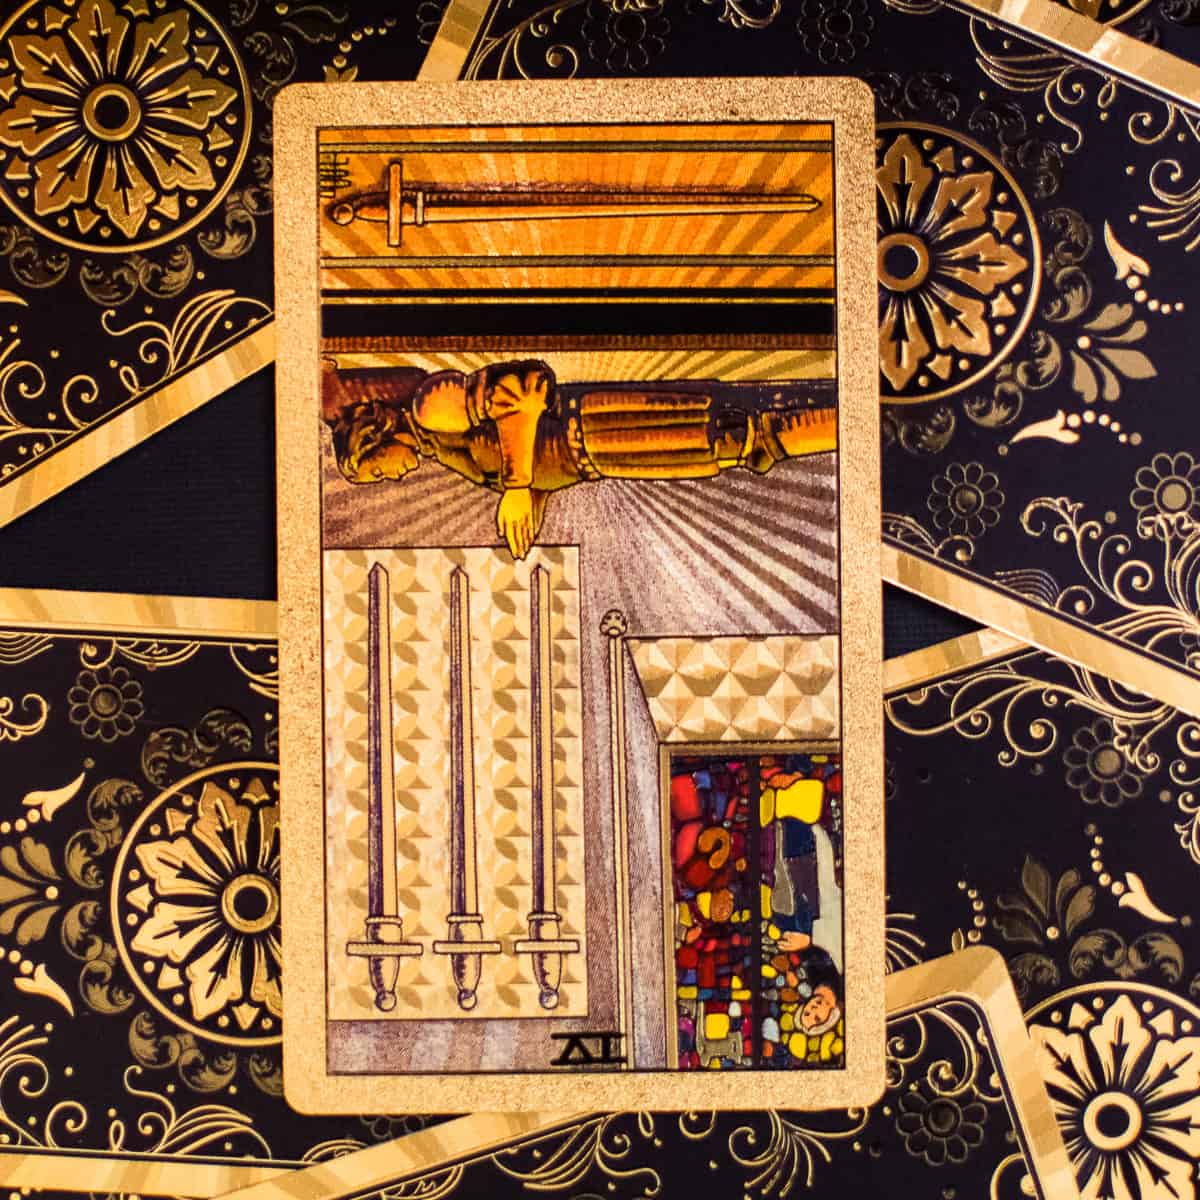 Four of Swords tarot card in the reversed position showing a man laying and resting with four swords hanging in the background.